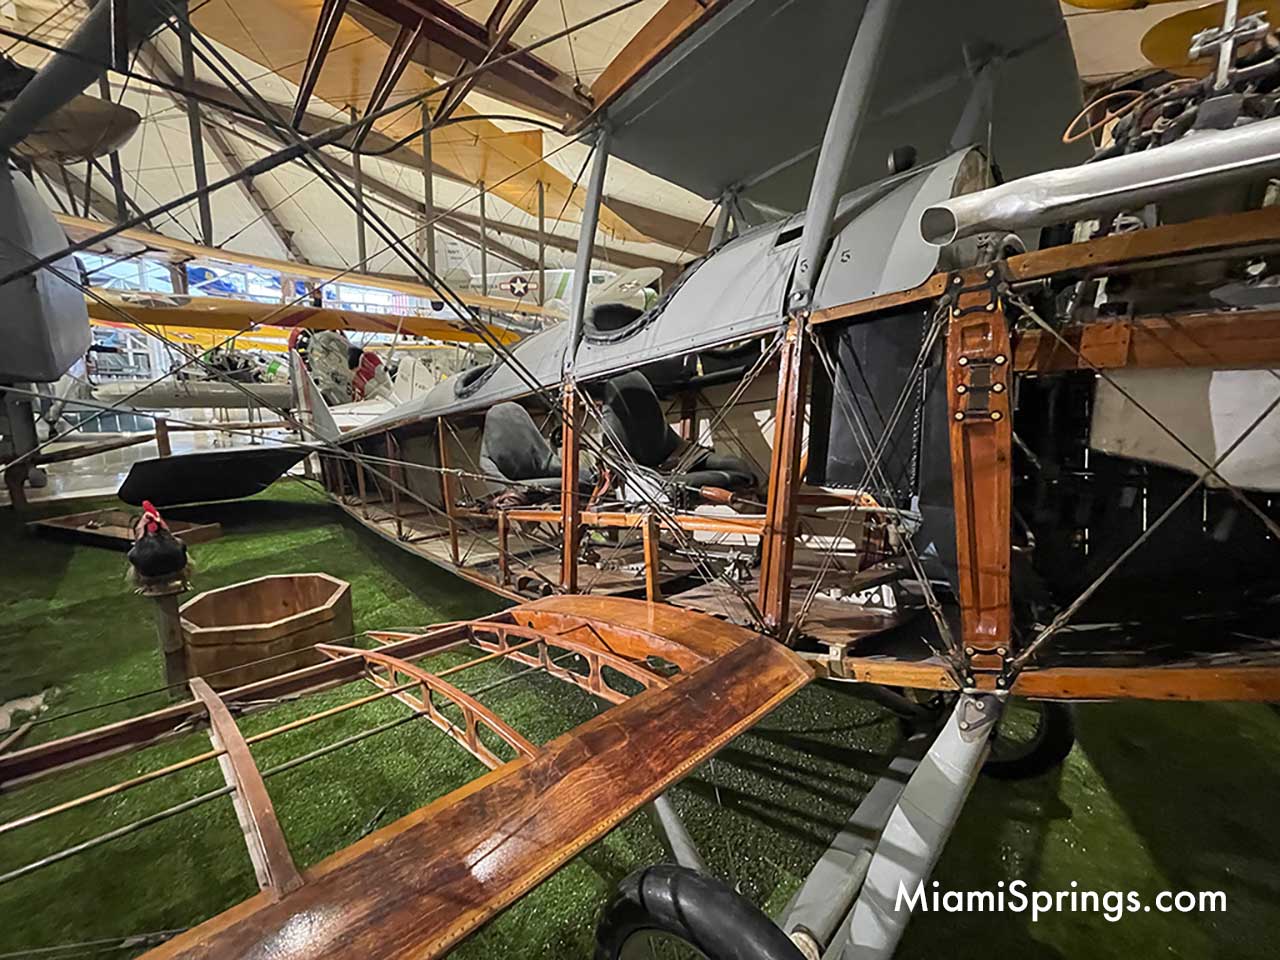 Curtiss JN "Jenny" At the National Naval Aviation Museum in Pensacola, Florida